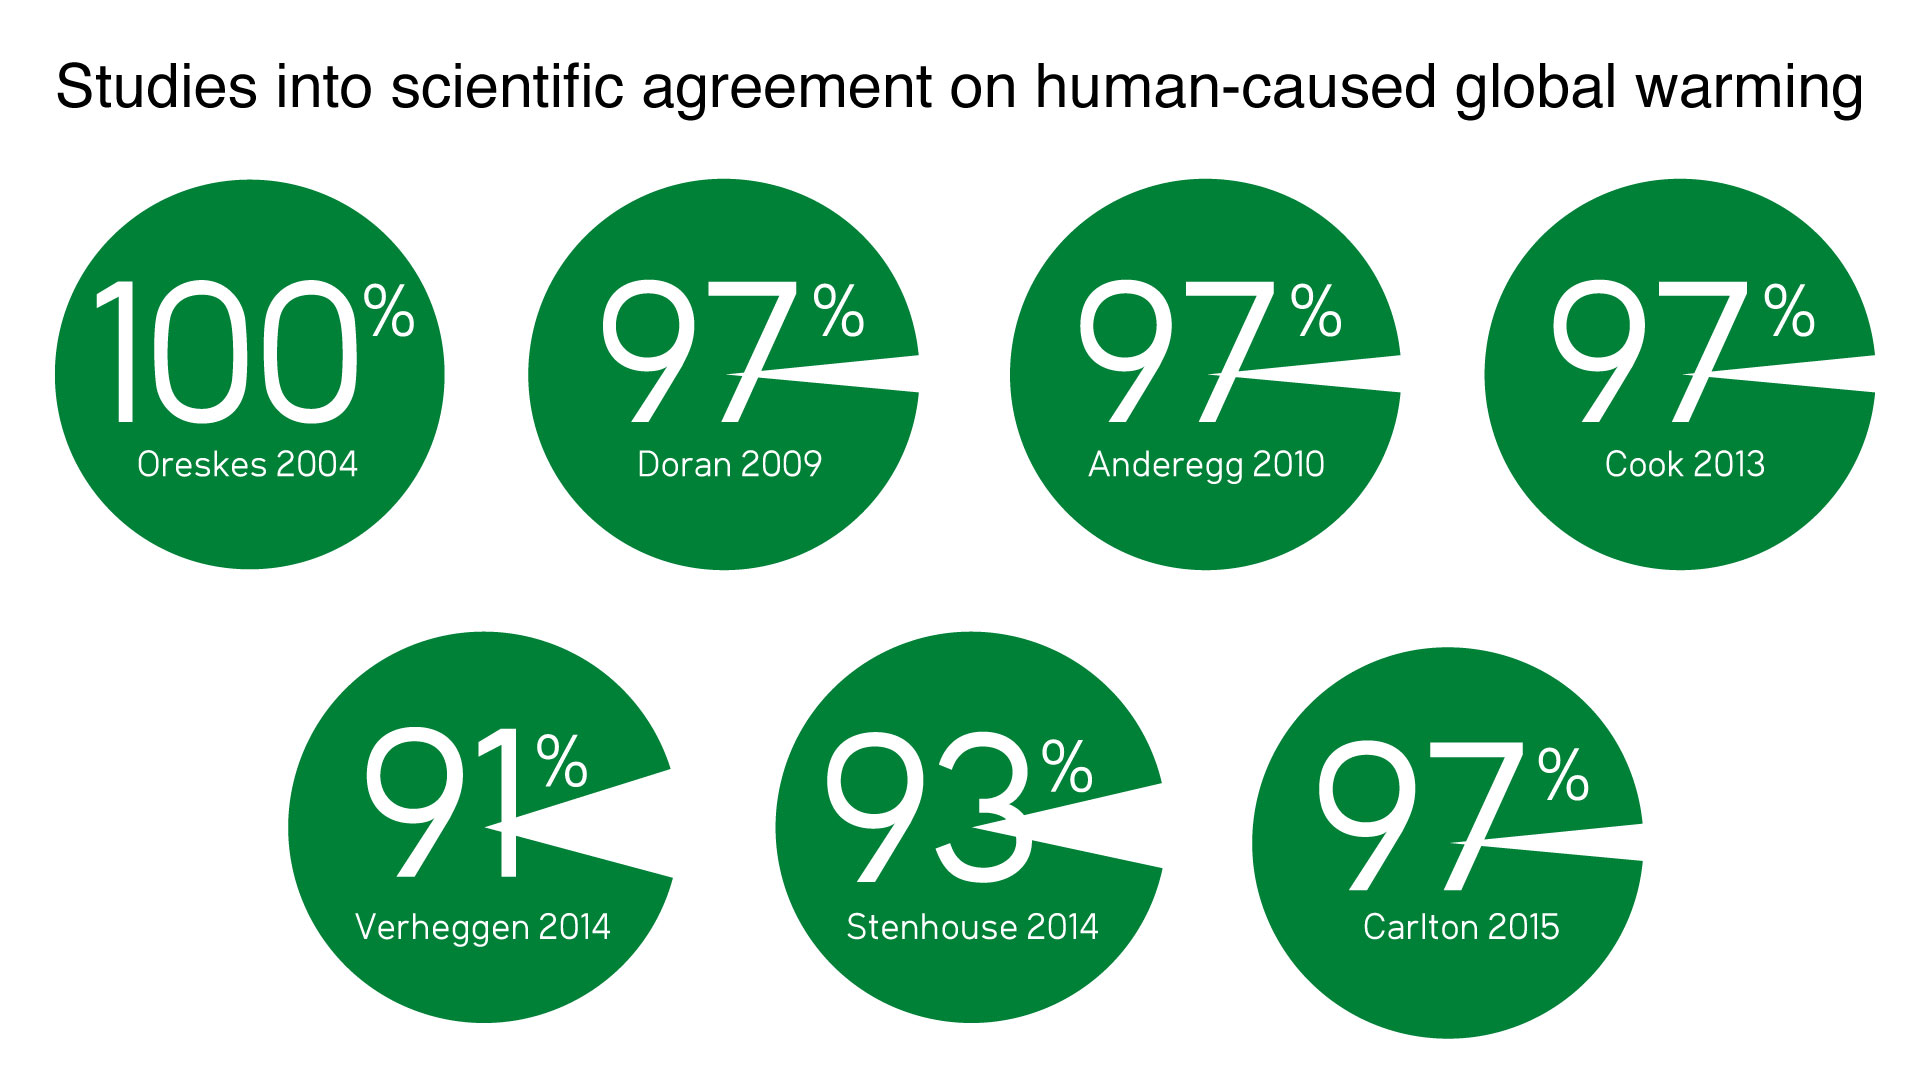 Graphic representing studies into scientific agreement on human-caused global warming.